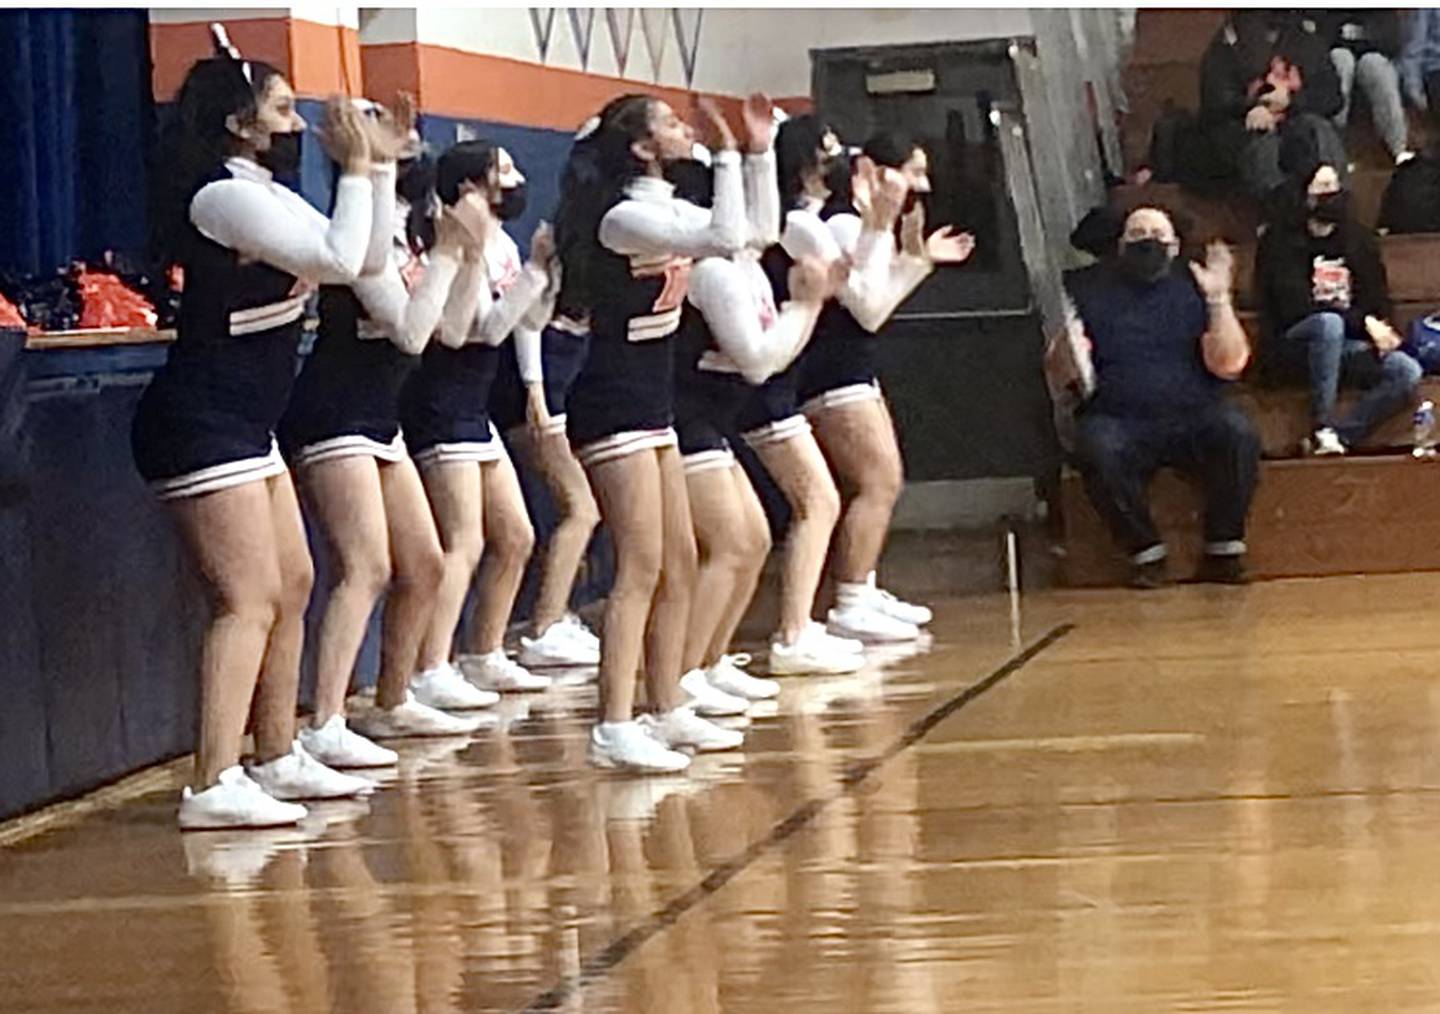 Tom Miller, K-12 music teacher at DePue Schools, keeps the beat as the cheer sponsor for the Little Giants cheerleader He took the job because they had no one else to turn to.